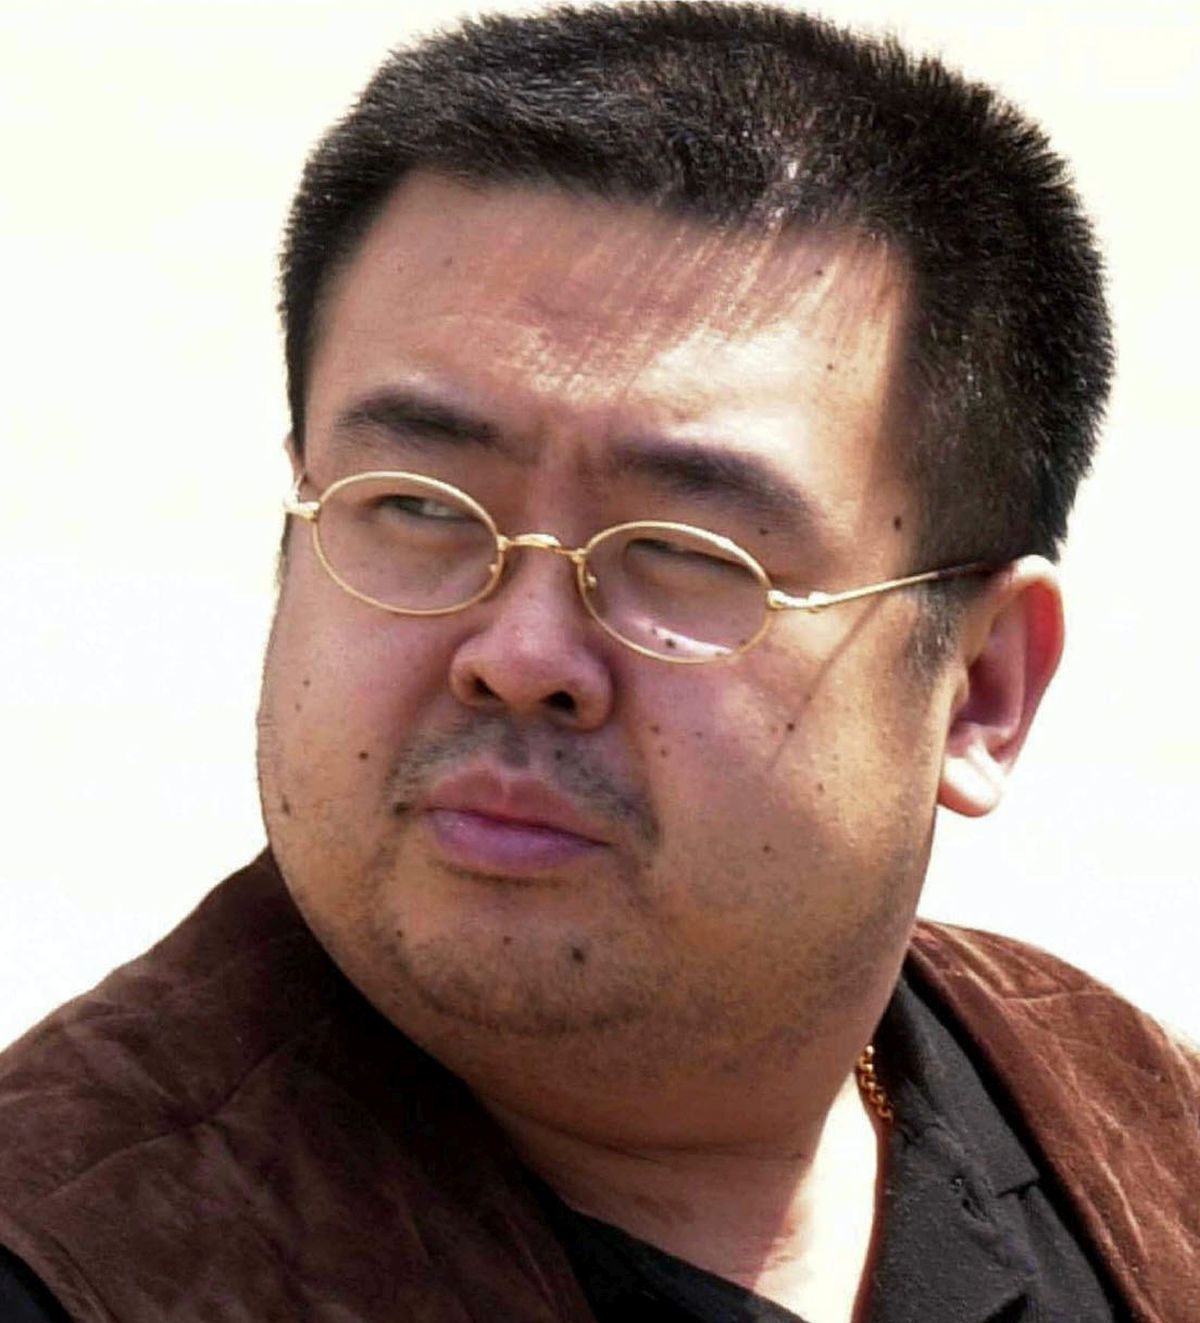 epa05793931 An undated picture taken in a unknown location and made available on 15 February 2017 shows Kim Jong-nam, the half brother of North Korean leader Kim Jong-un. A press statement released by the Malaysian police on 14 February 2017, said a 46-year-old North Korean named Kim Chol died the previous day on his way to a hospital from a Malaysia International Airport service counter where he sought initial medical treatment. Reports said Kim Chol, an alias used by Kim Jong-nam, was attacked by two unidentified women with chemical sprays. The suspects fled immediately in a taxi, and Malaysian police suspect North Korea was behind the killing.  EPA/YONHAP SOUTH KOREA OUT